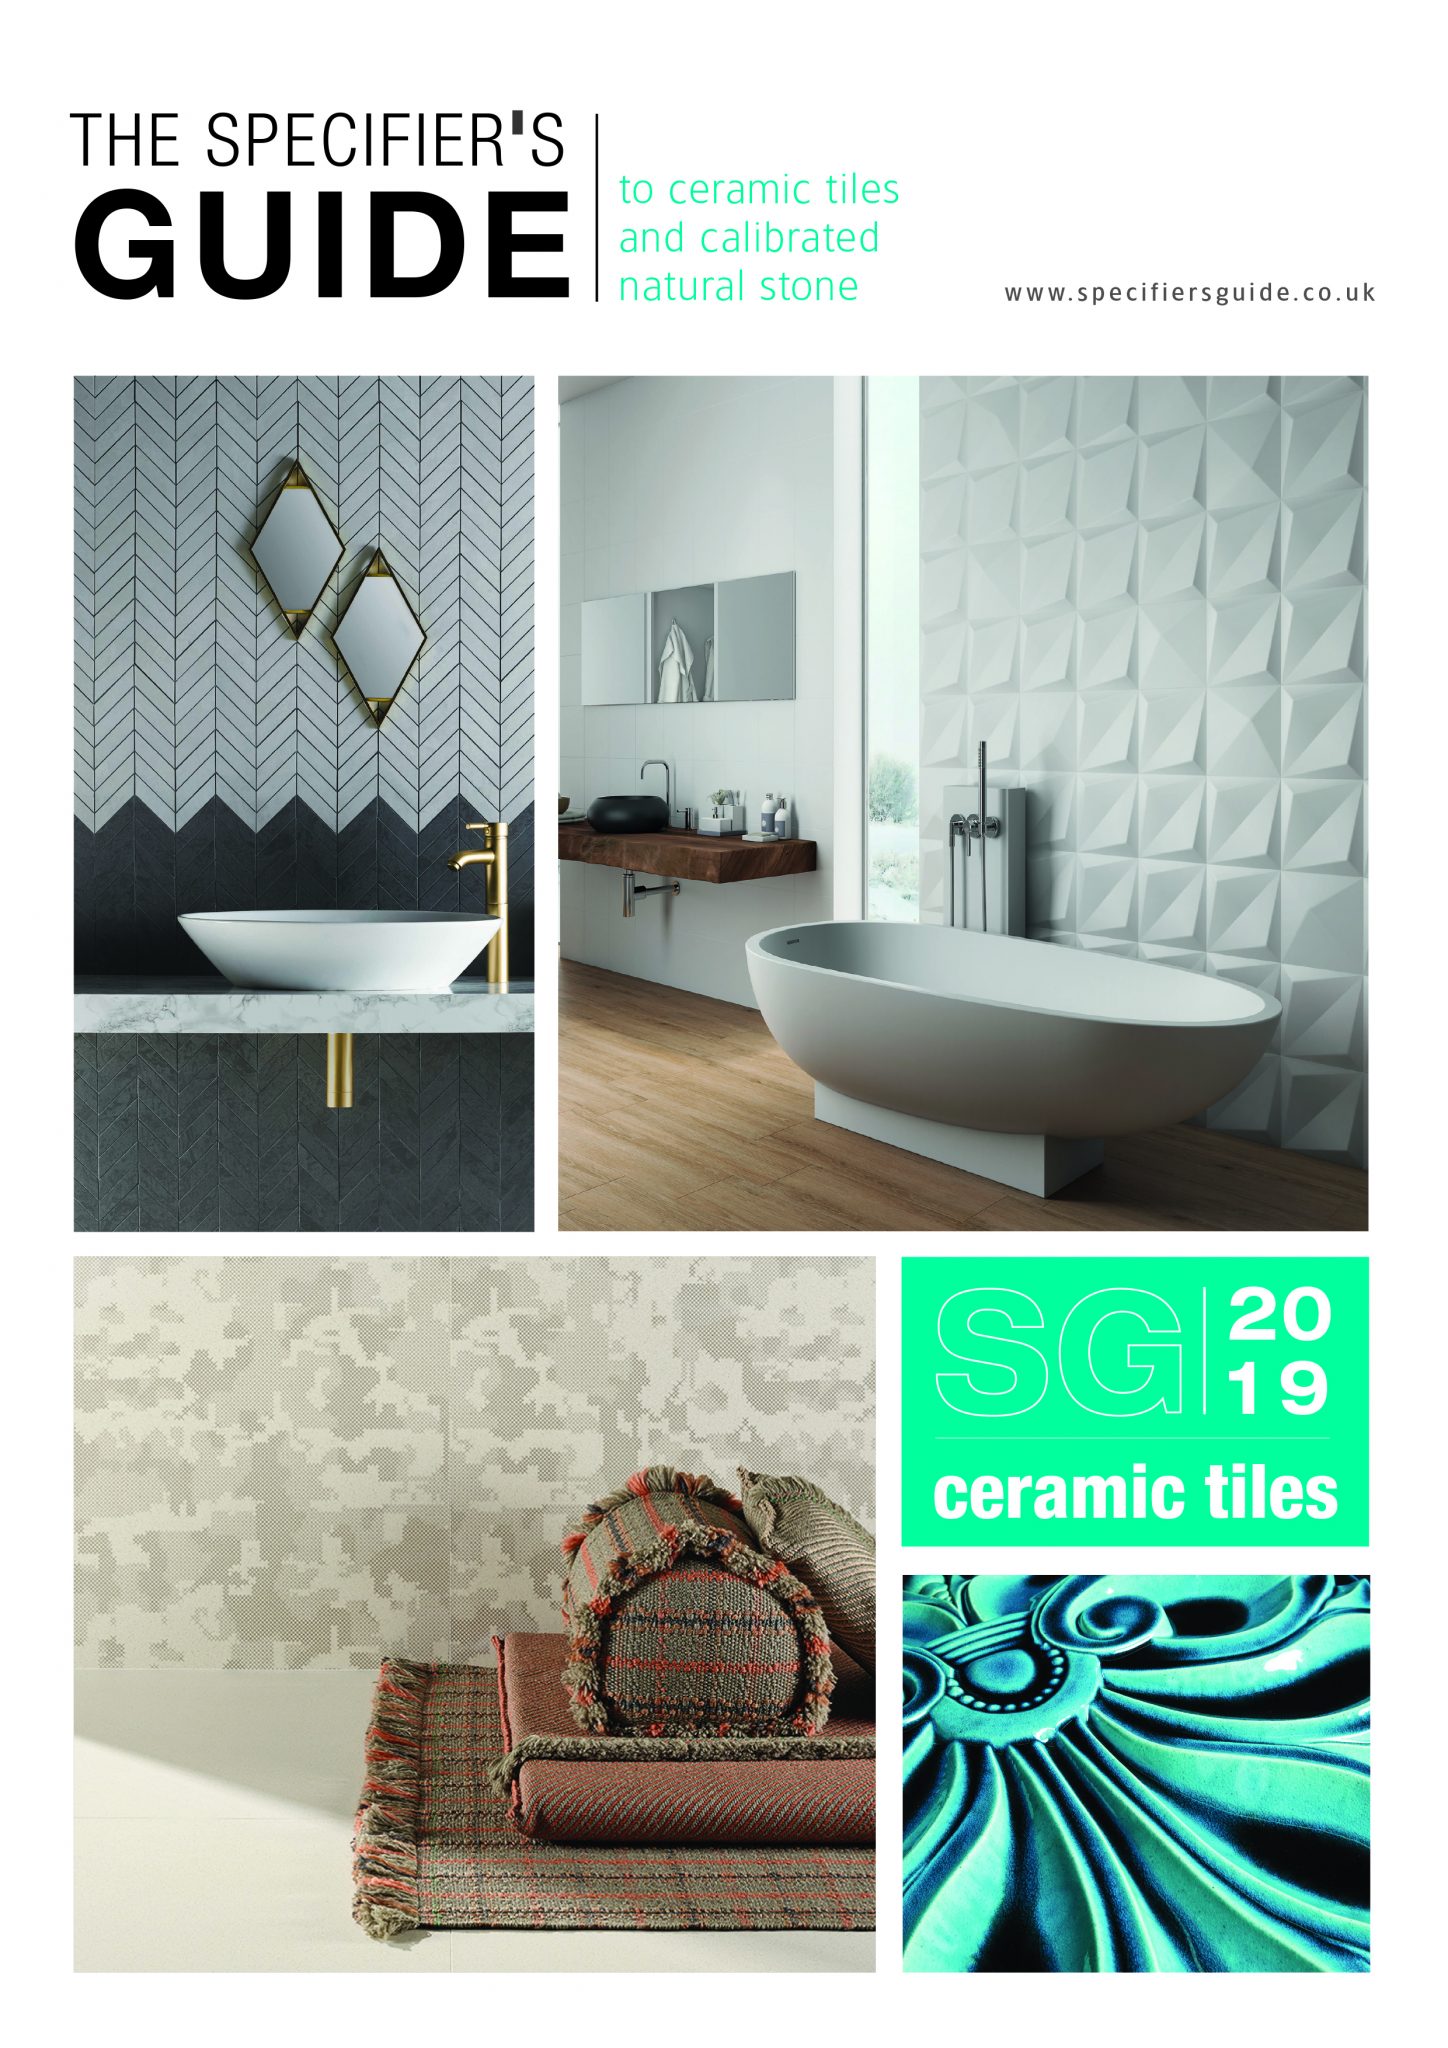 The latest edition of the essential architect’s guide to ceramic tiles just published by Kick-Start Publishing